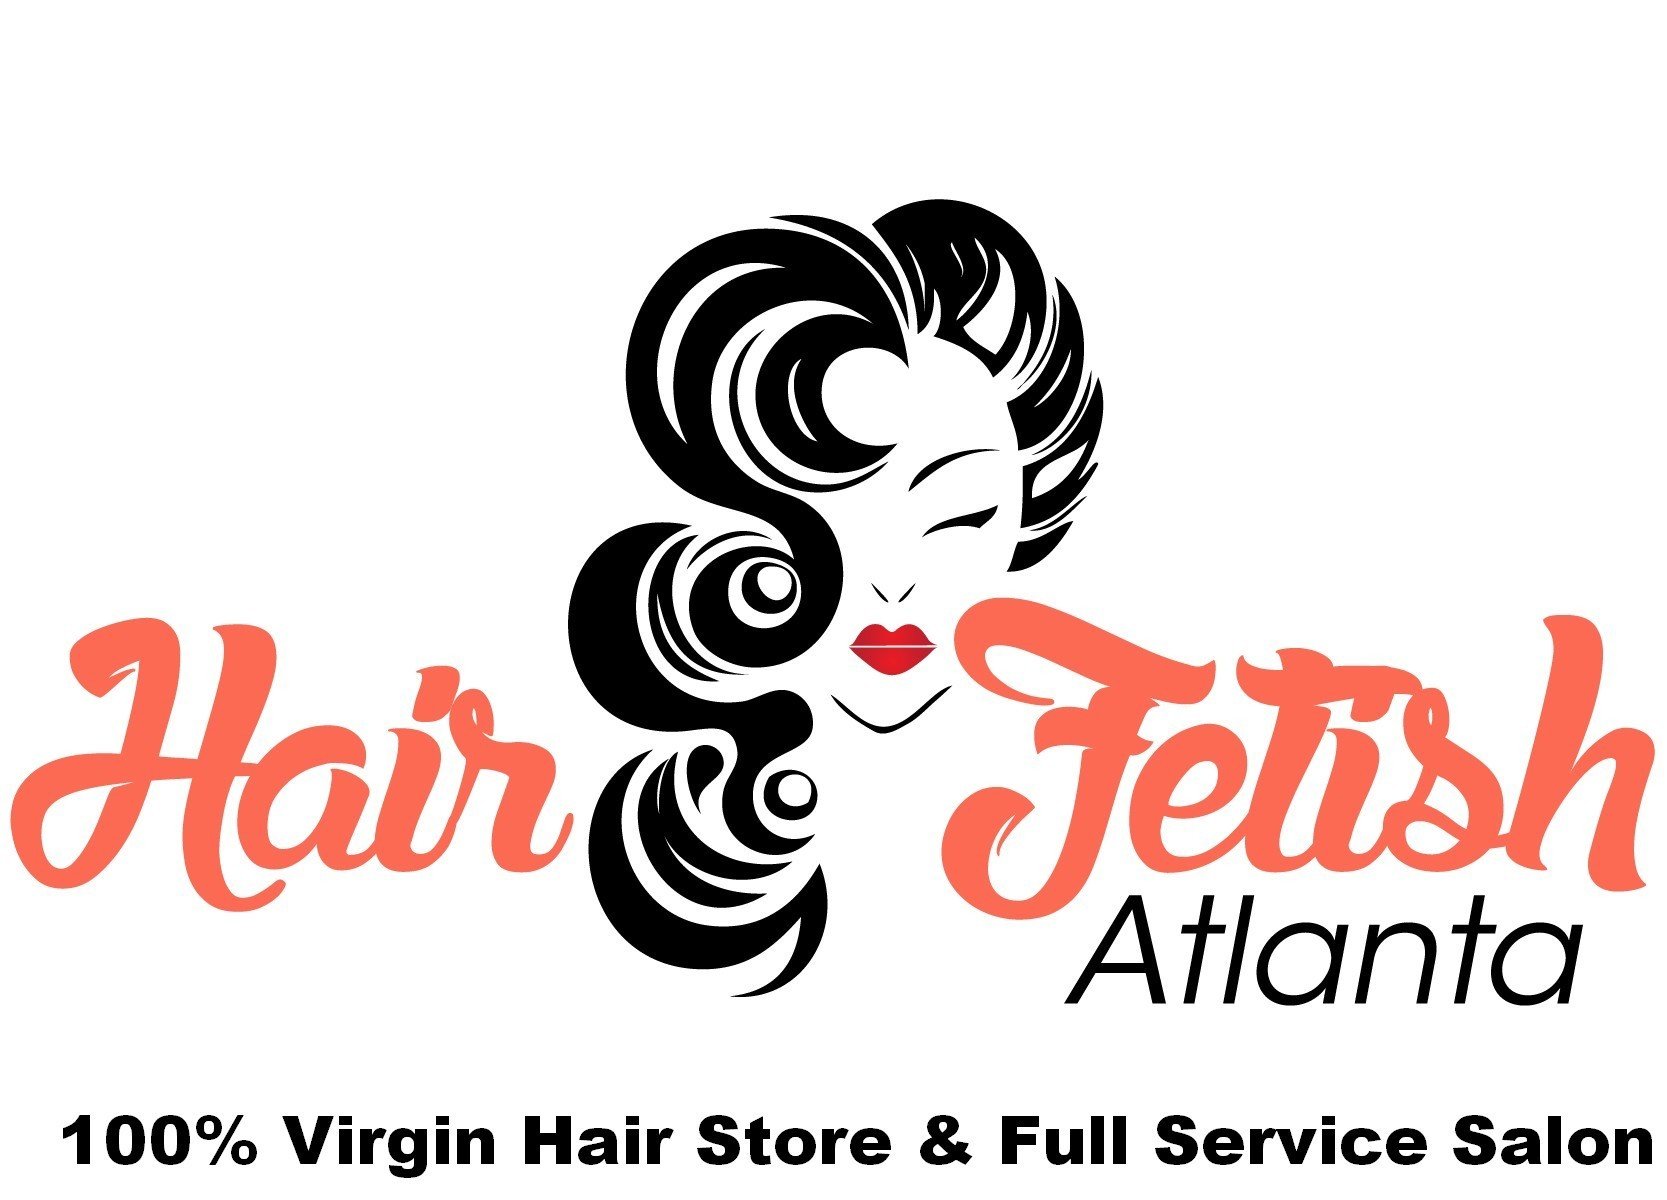 Welcome to Hair Fetish Atlanta New Website and Blog